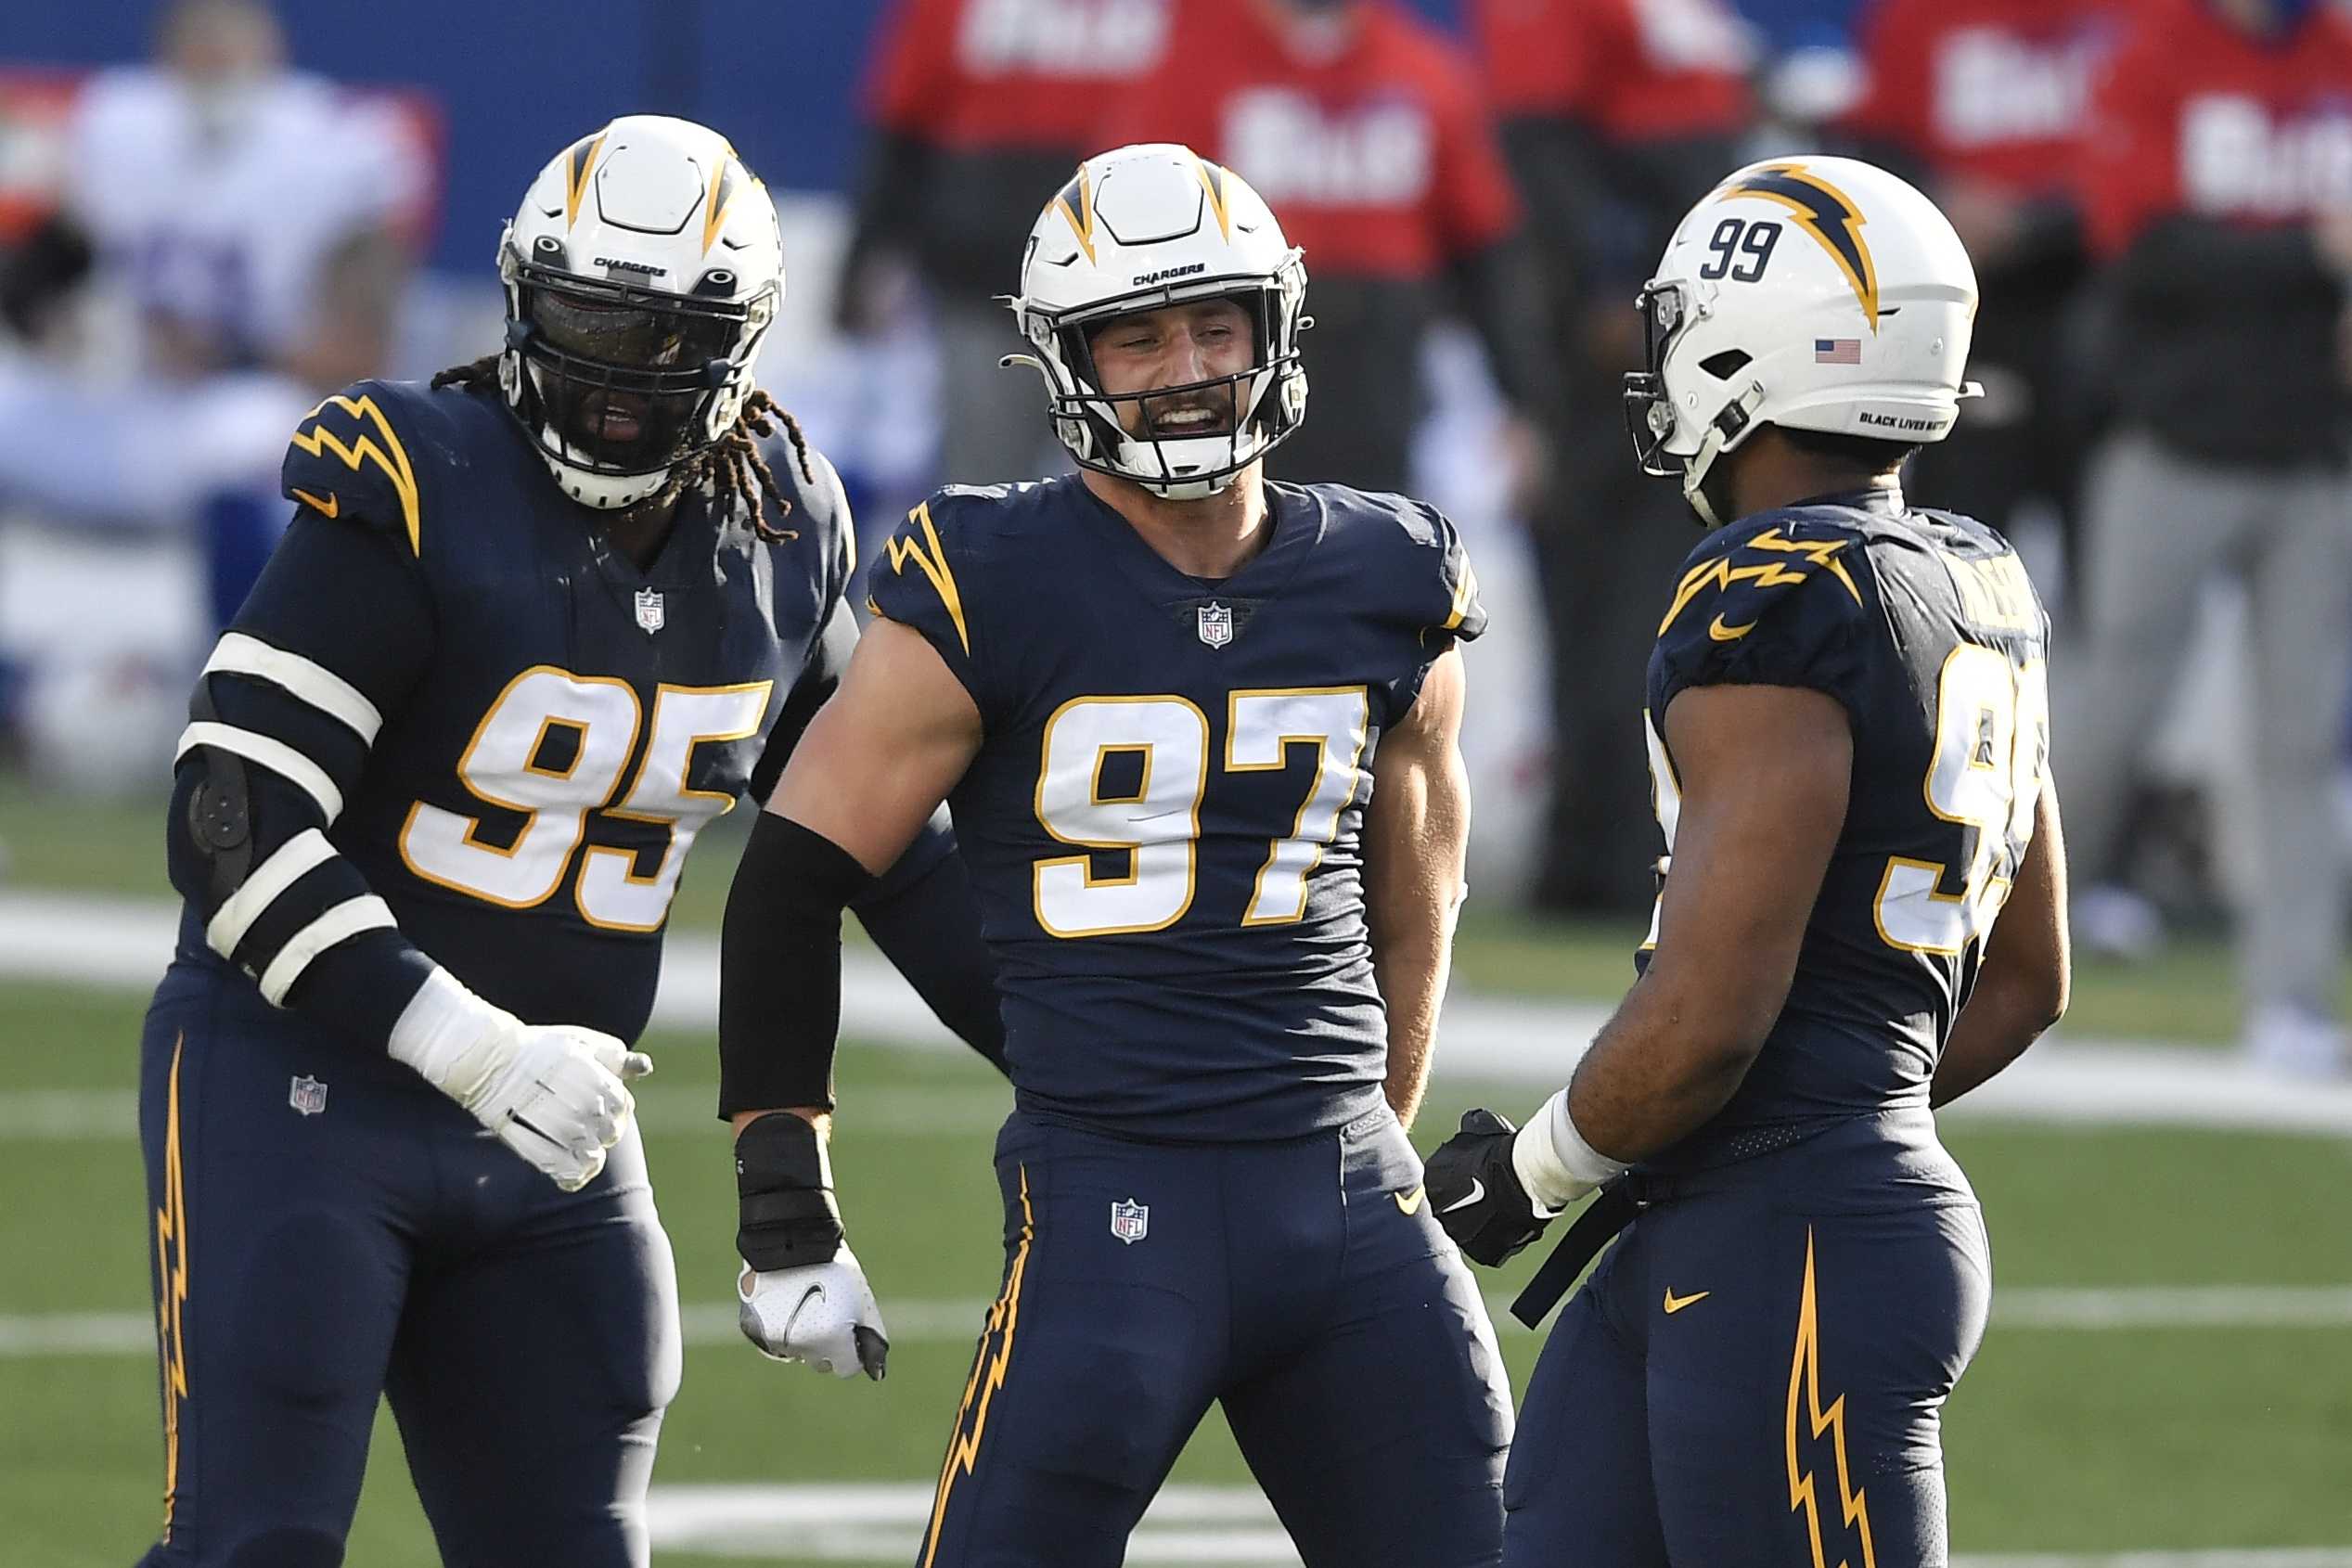  Los Angeles Chargers: Highs and Lows vs the Bills